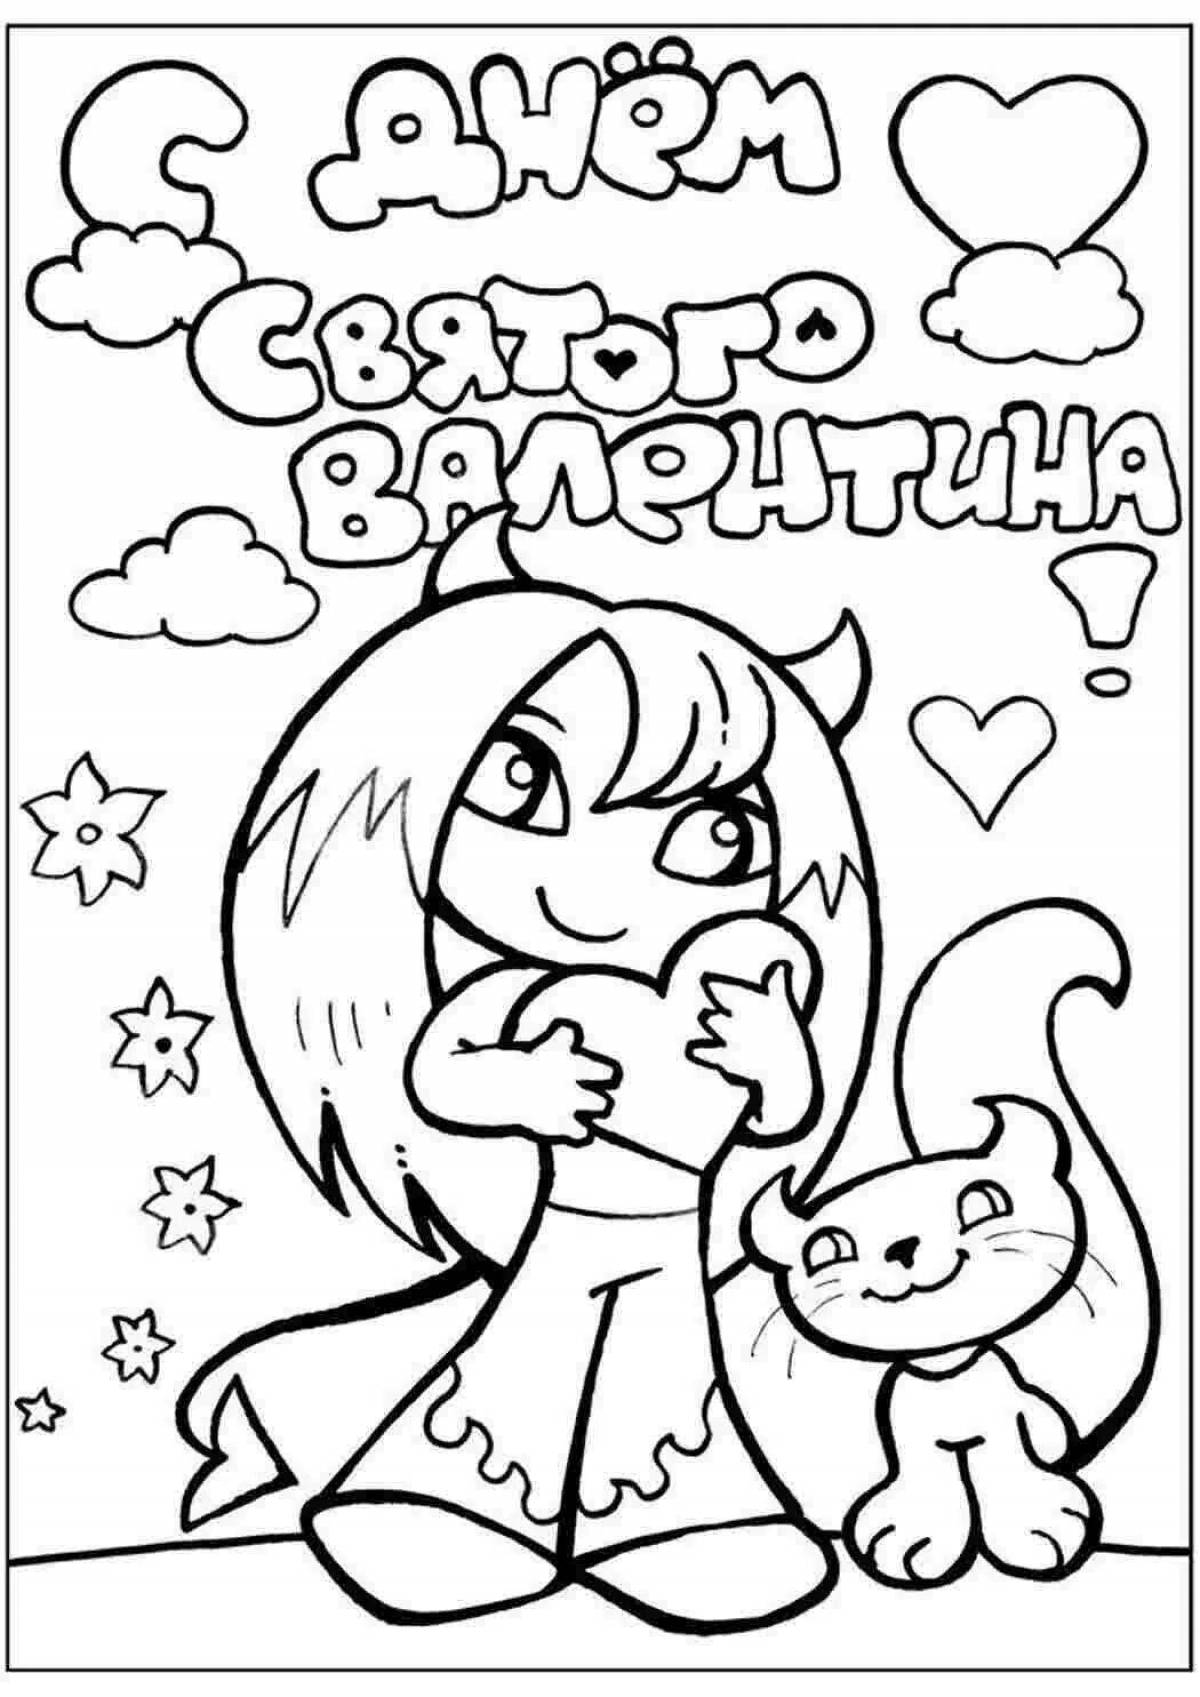 Happy valentine's day coloring book for kids